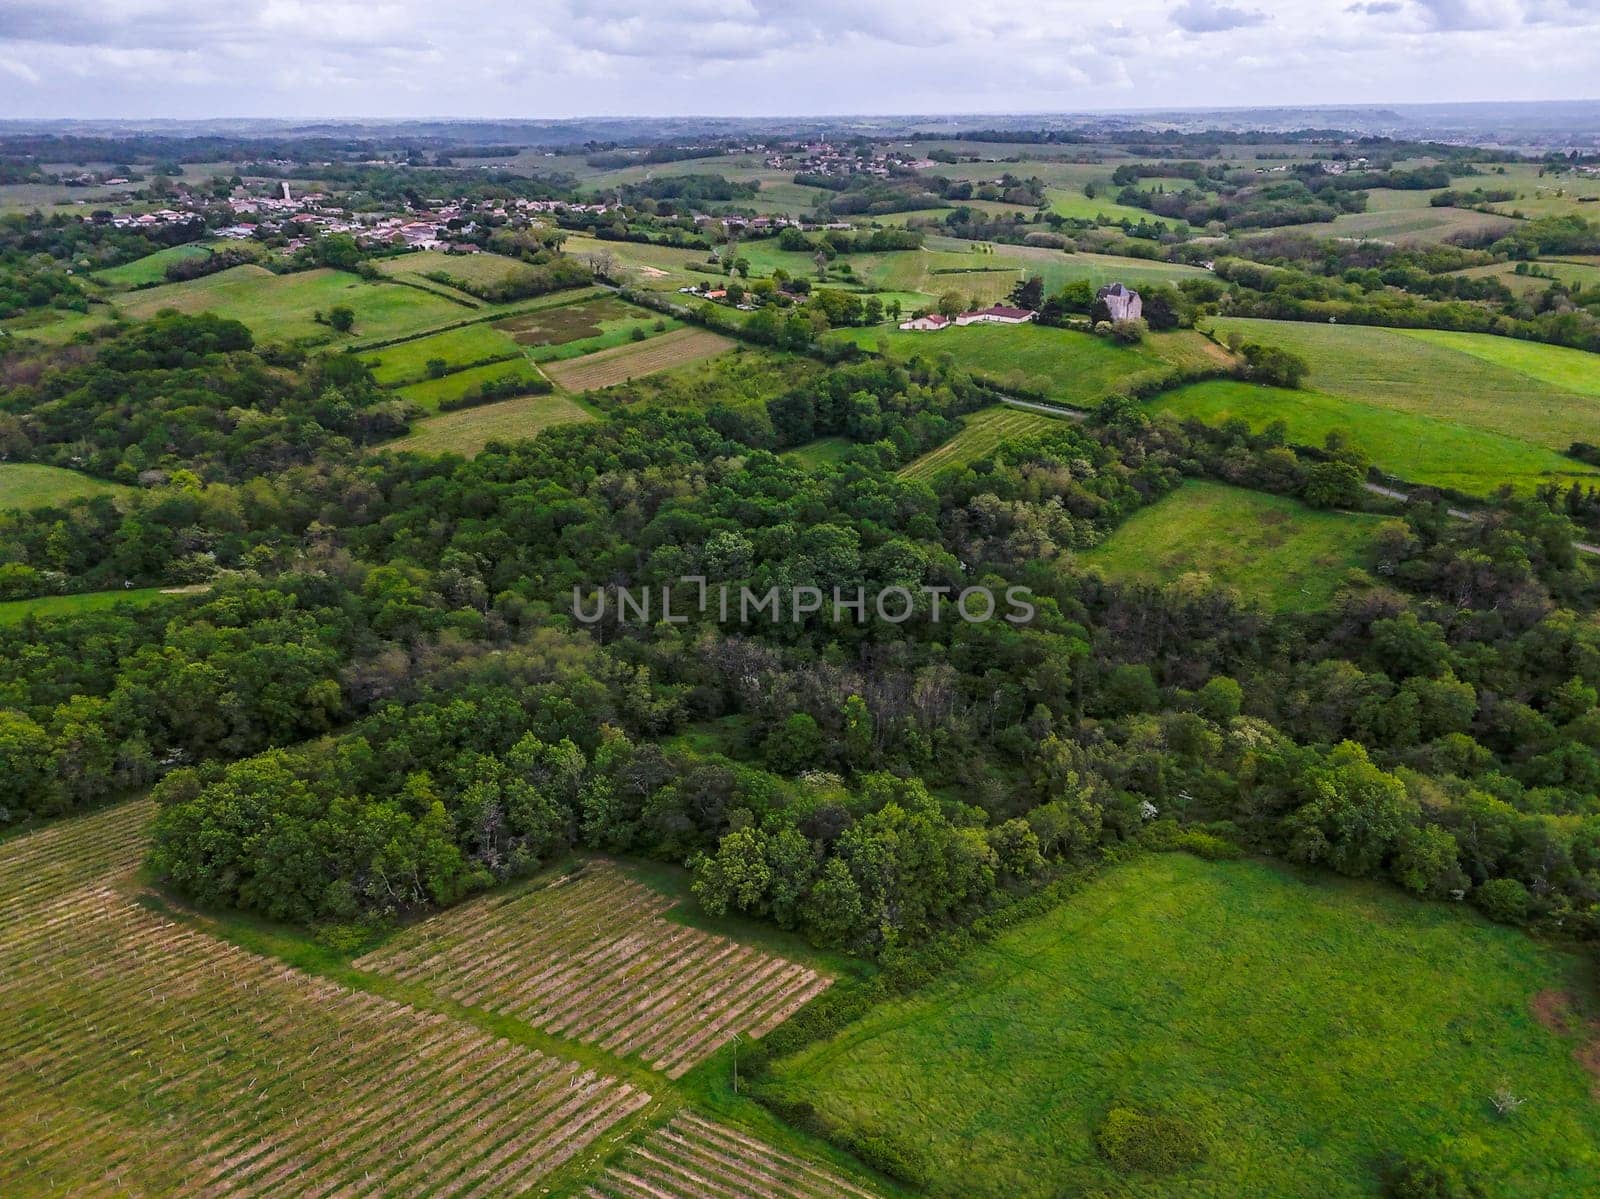 Aerial view of Bordeaux vineyard at spring under cloudy sky, Rions, Gironde, France by FreeProd